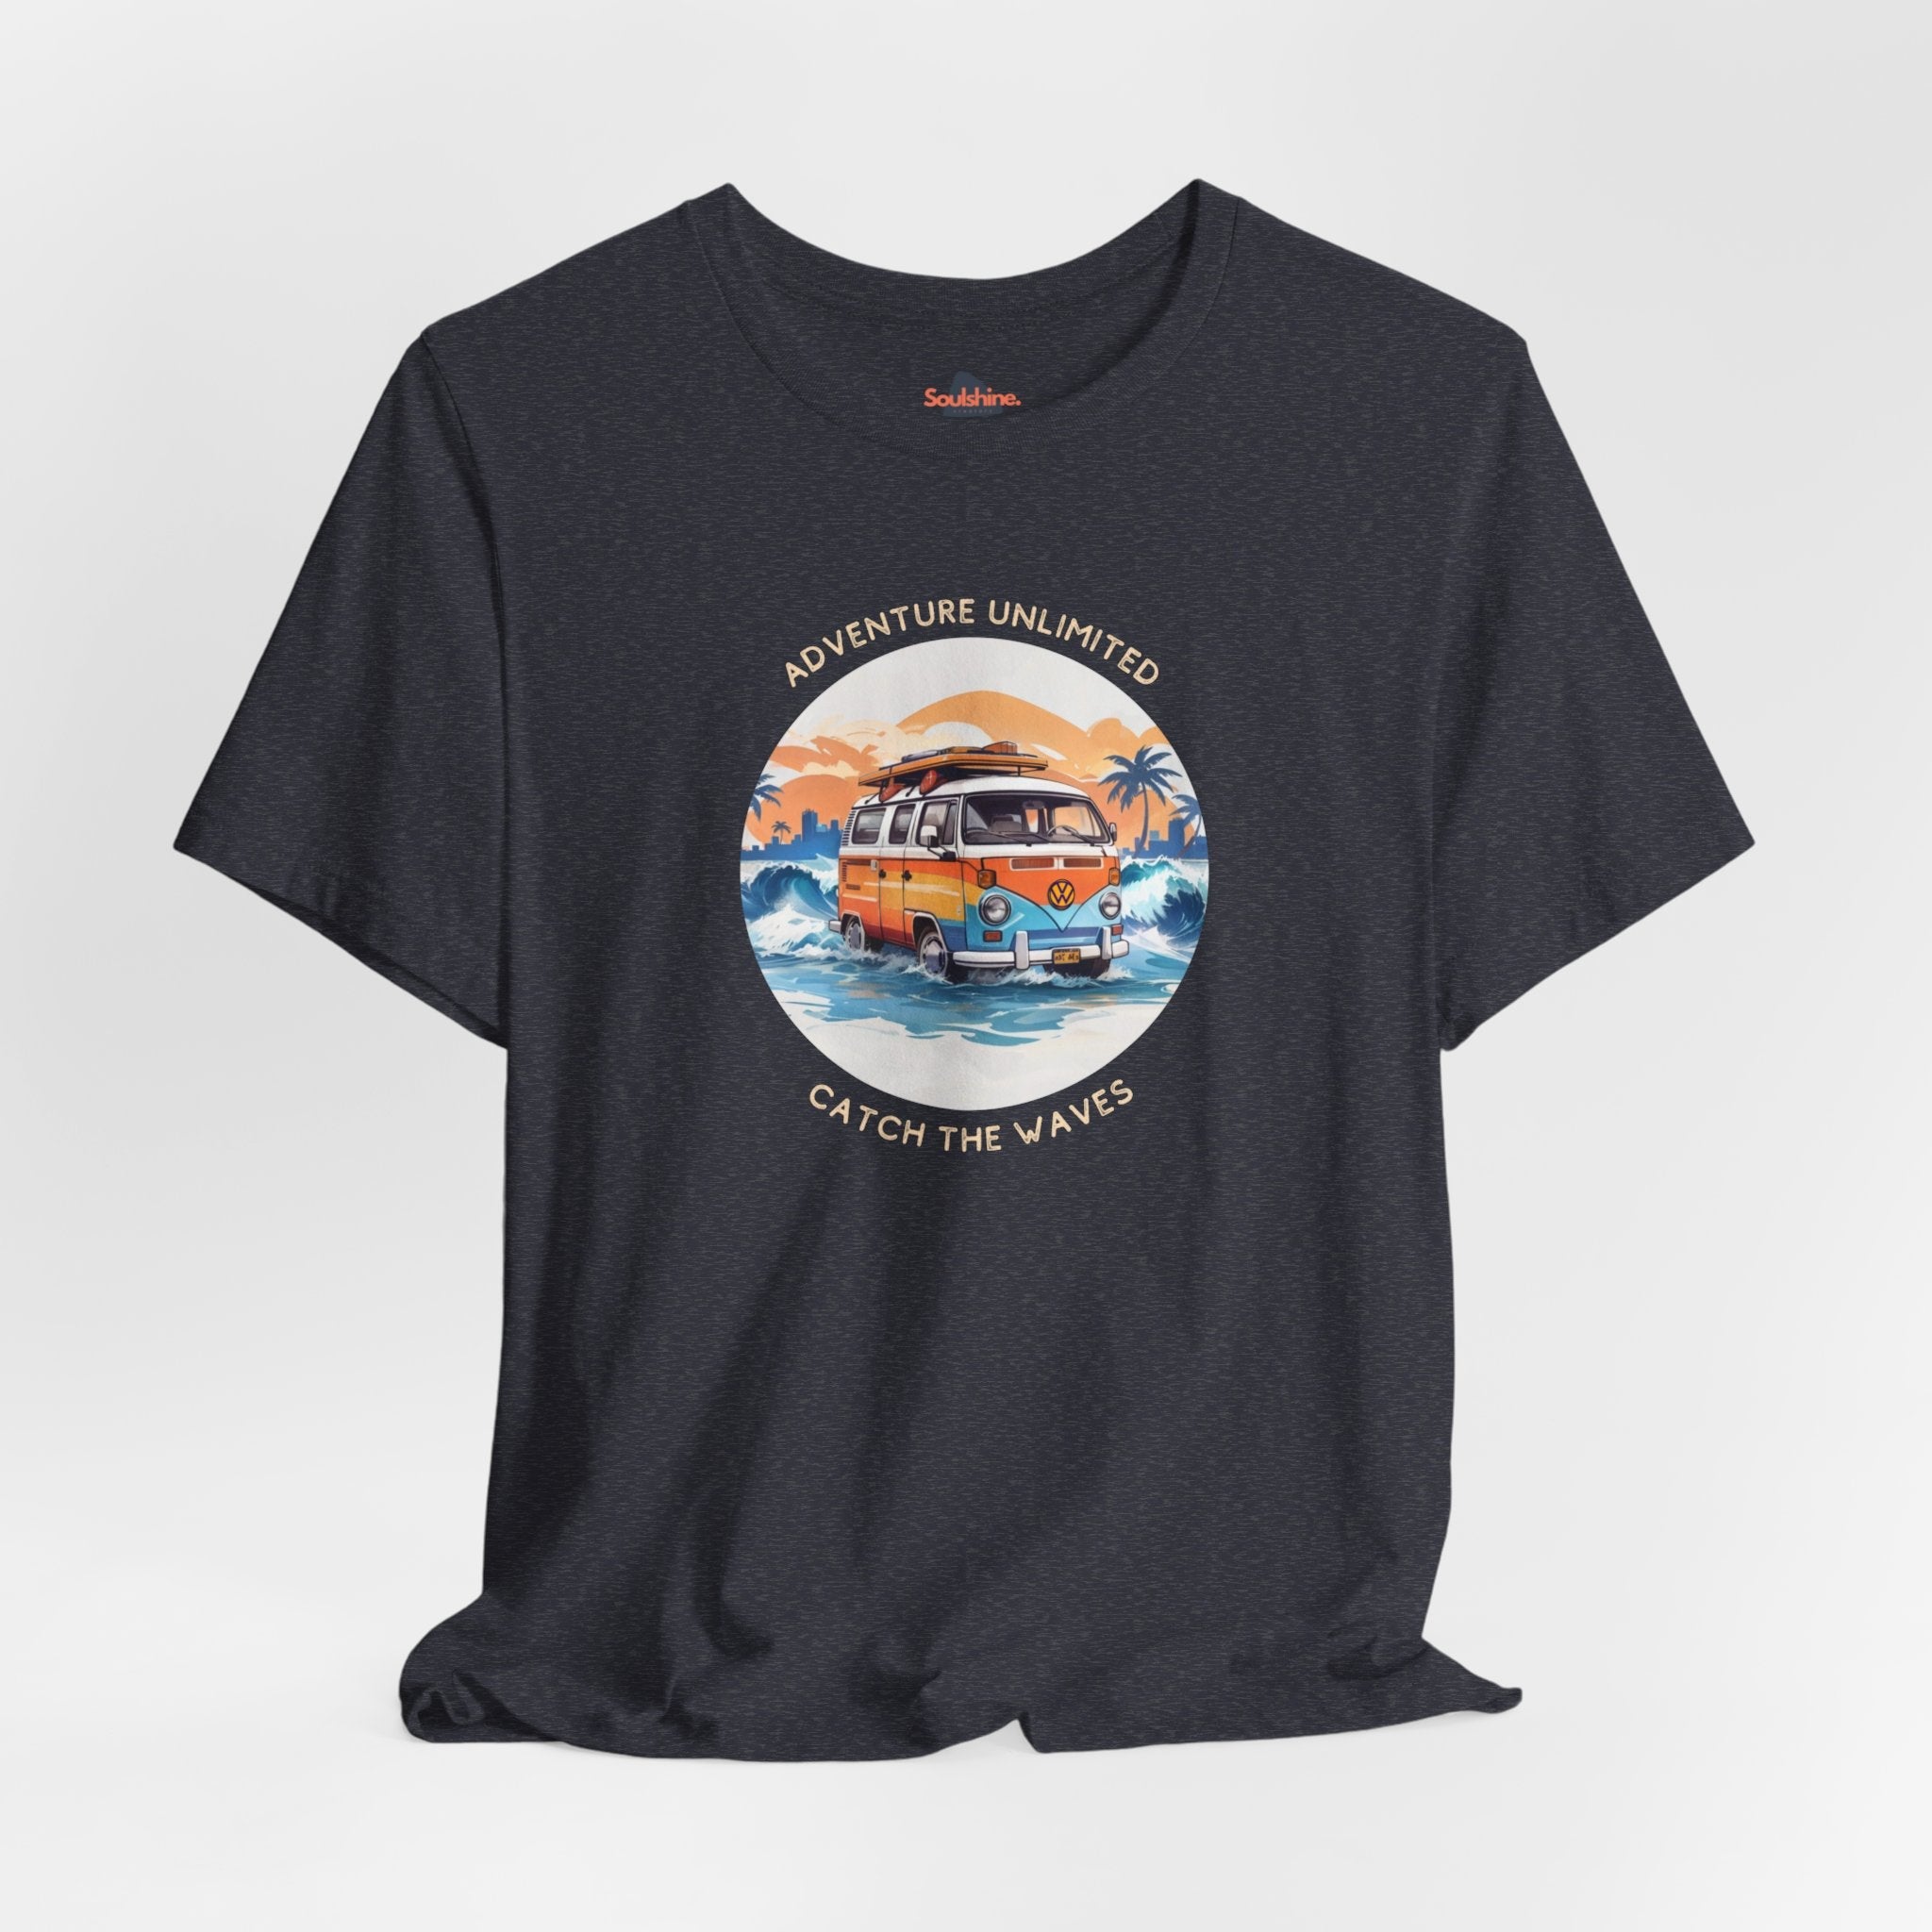 Adventure Unlimited black t-shirt with van on beach, direct-to-garment printed item